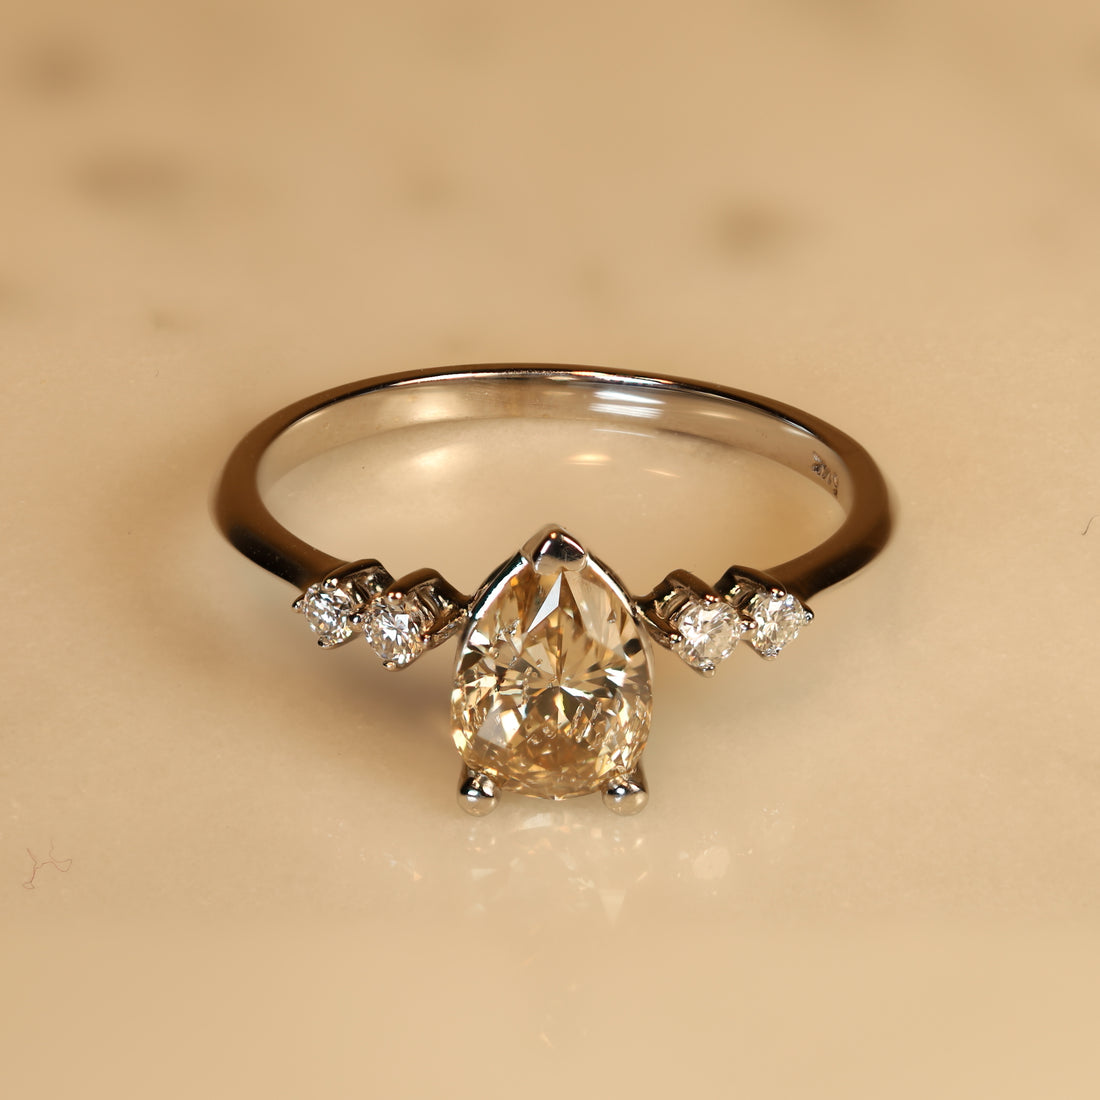 Rain Drop Ring with a 0.98 carat Pear Shaped Champagne Diamond